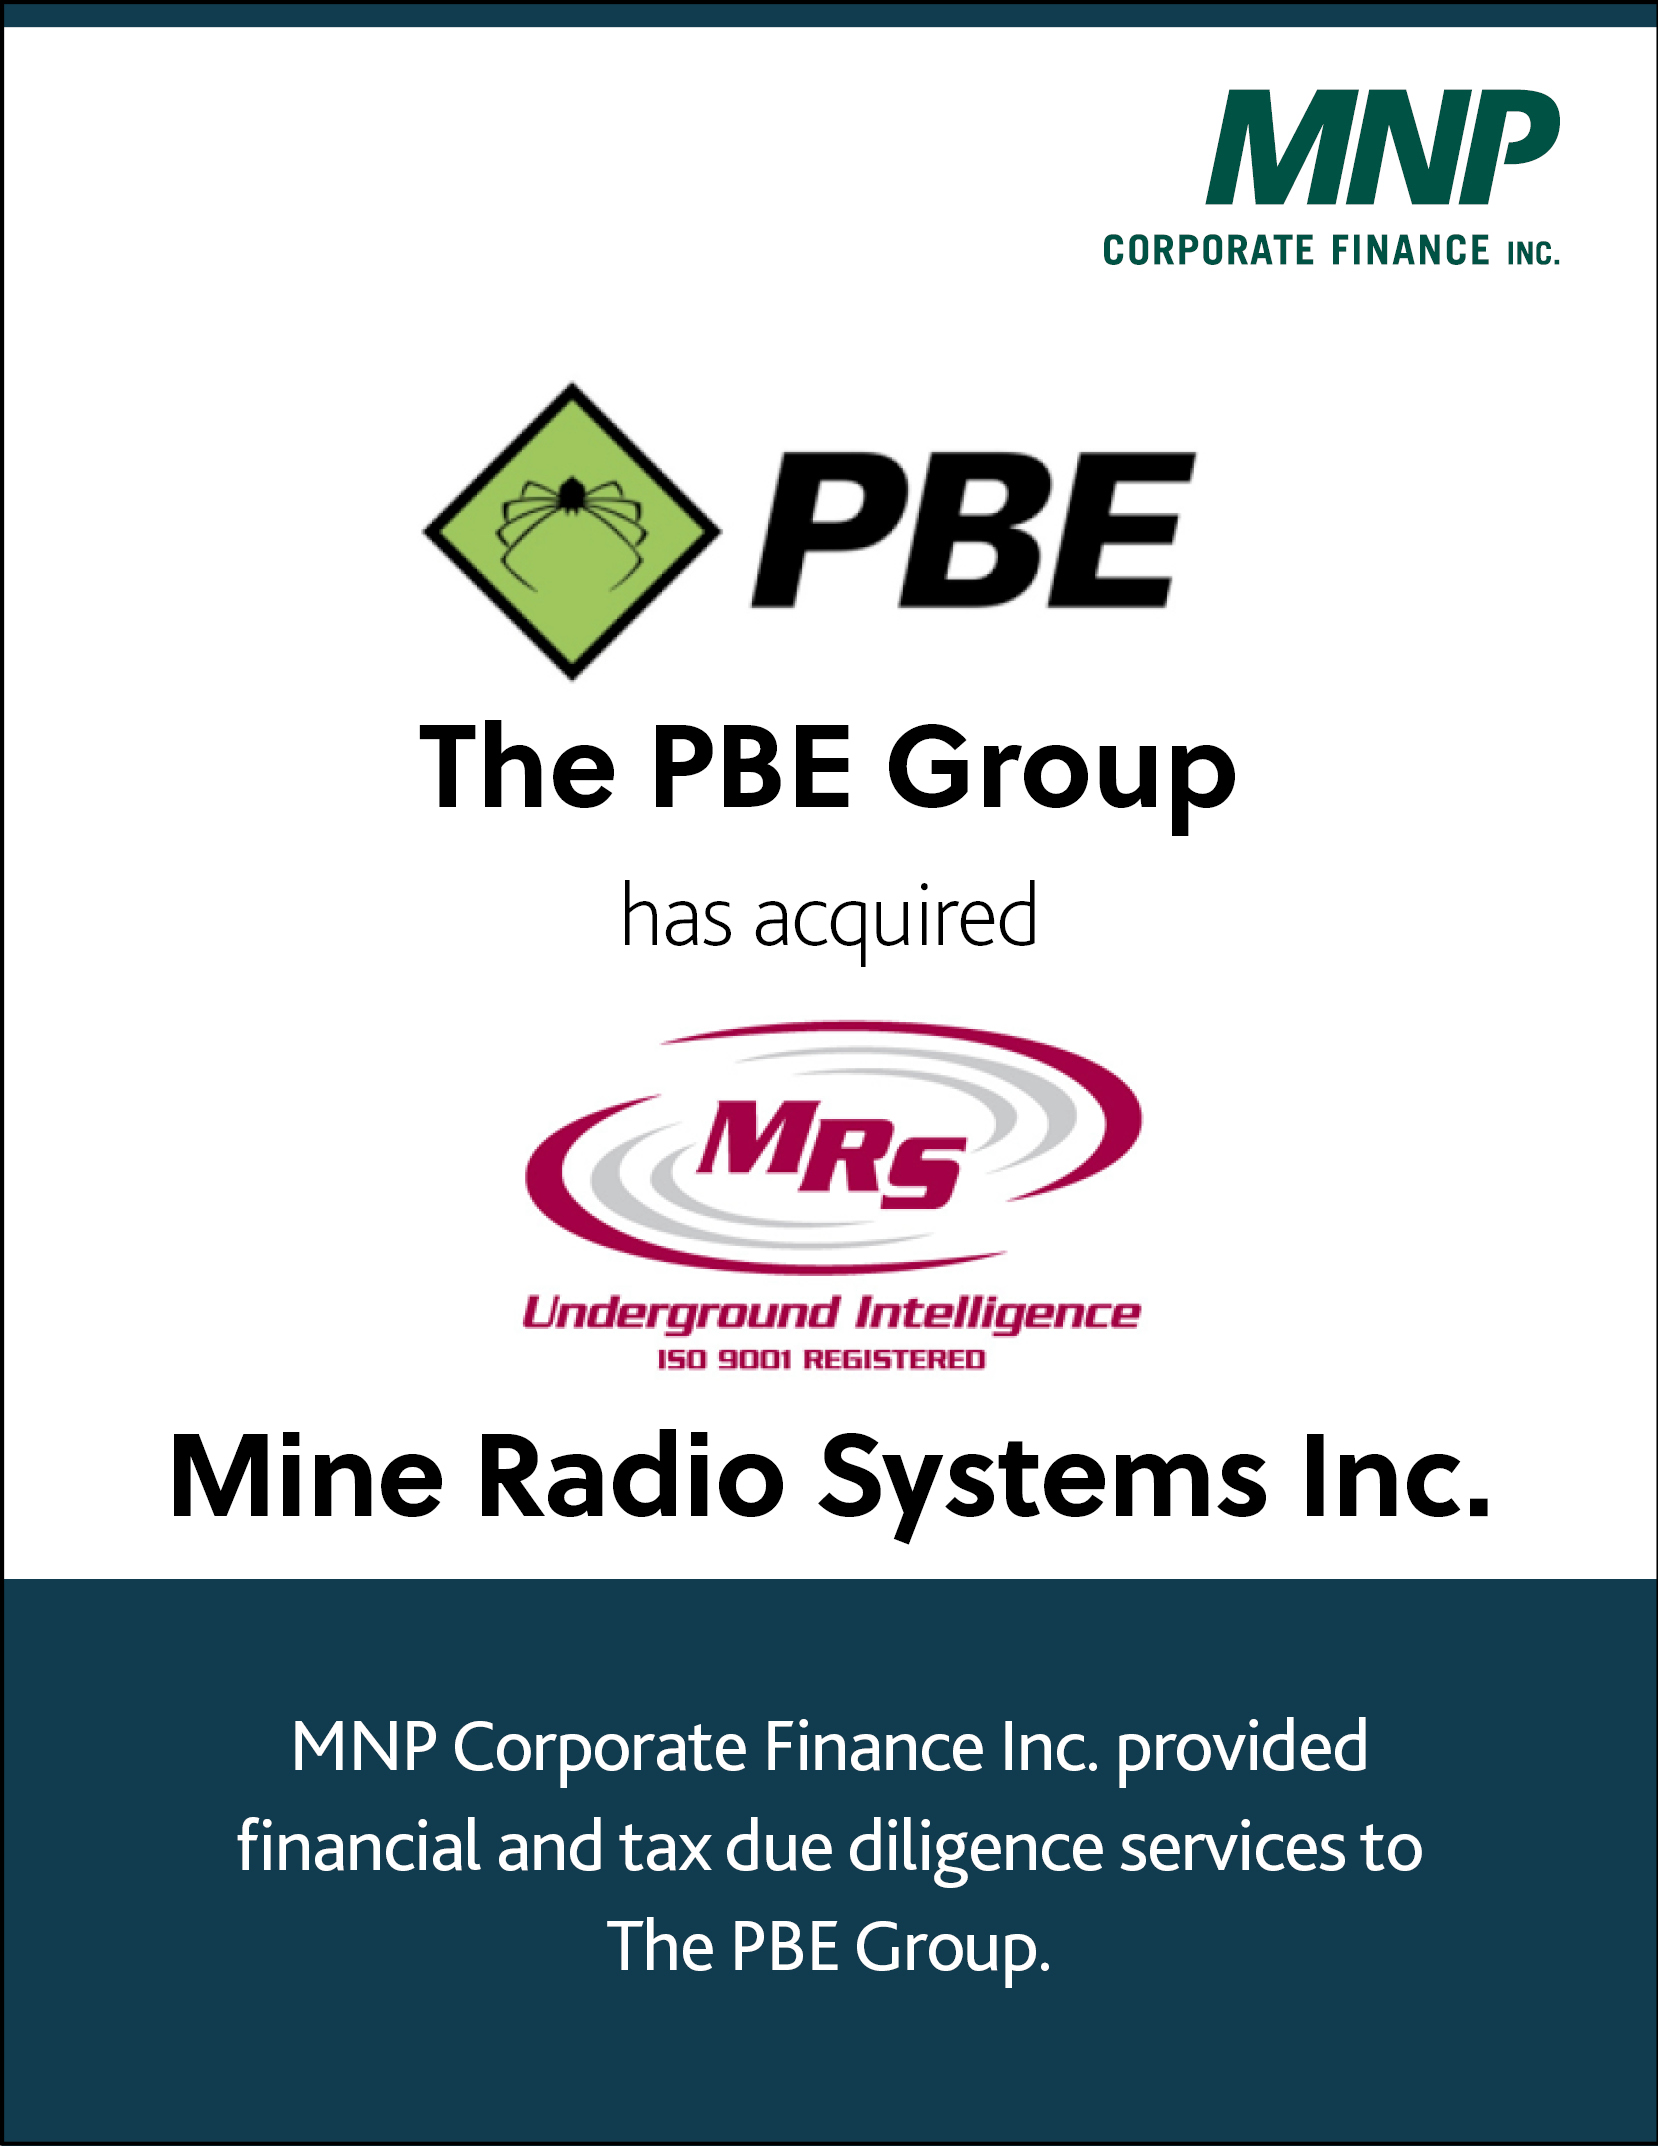 The PBE Group has acquired Mine Radio Systems Inc.